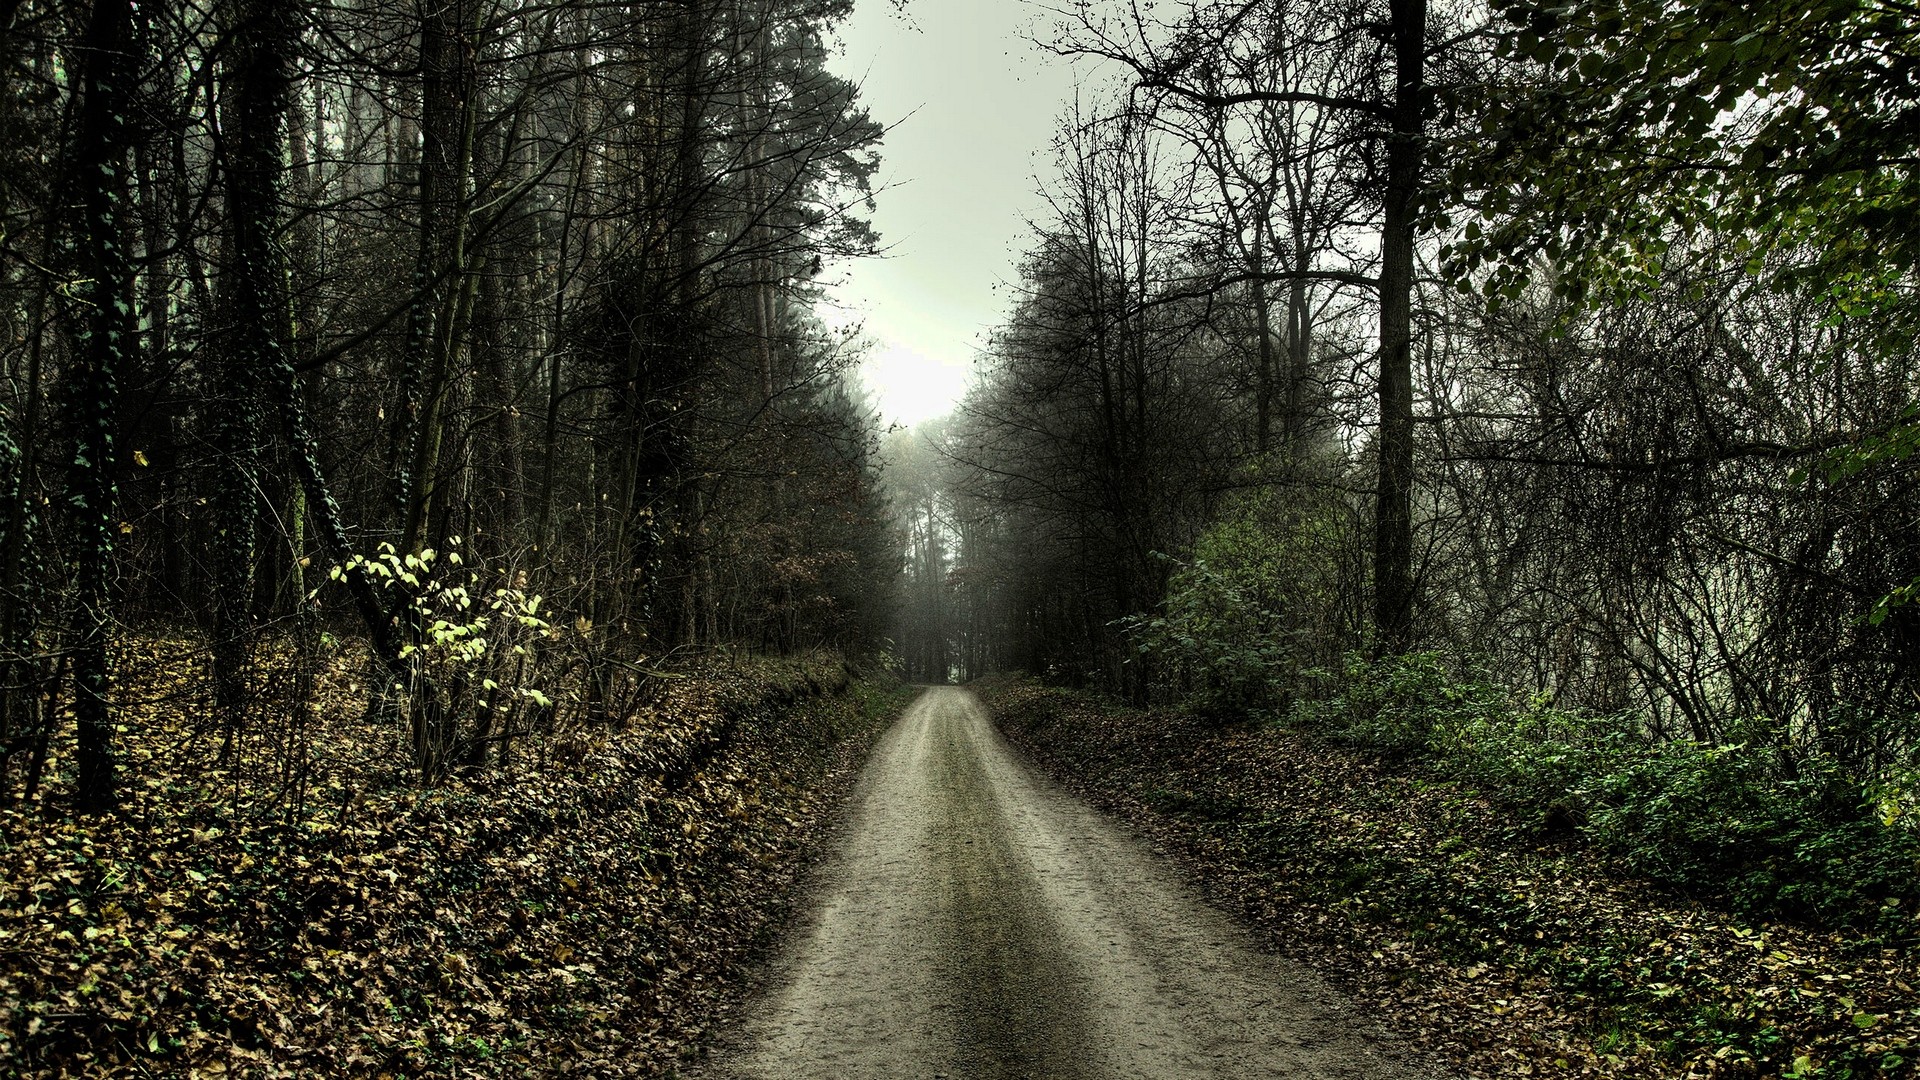 General 1920x1080 nature path forest trees spooky dirt road outdoors